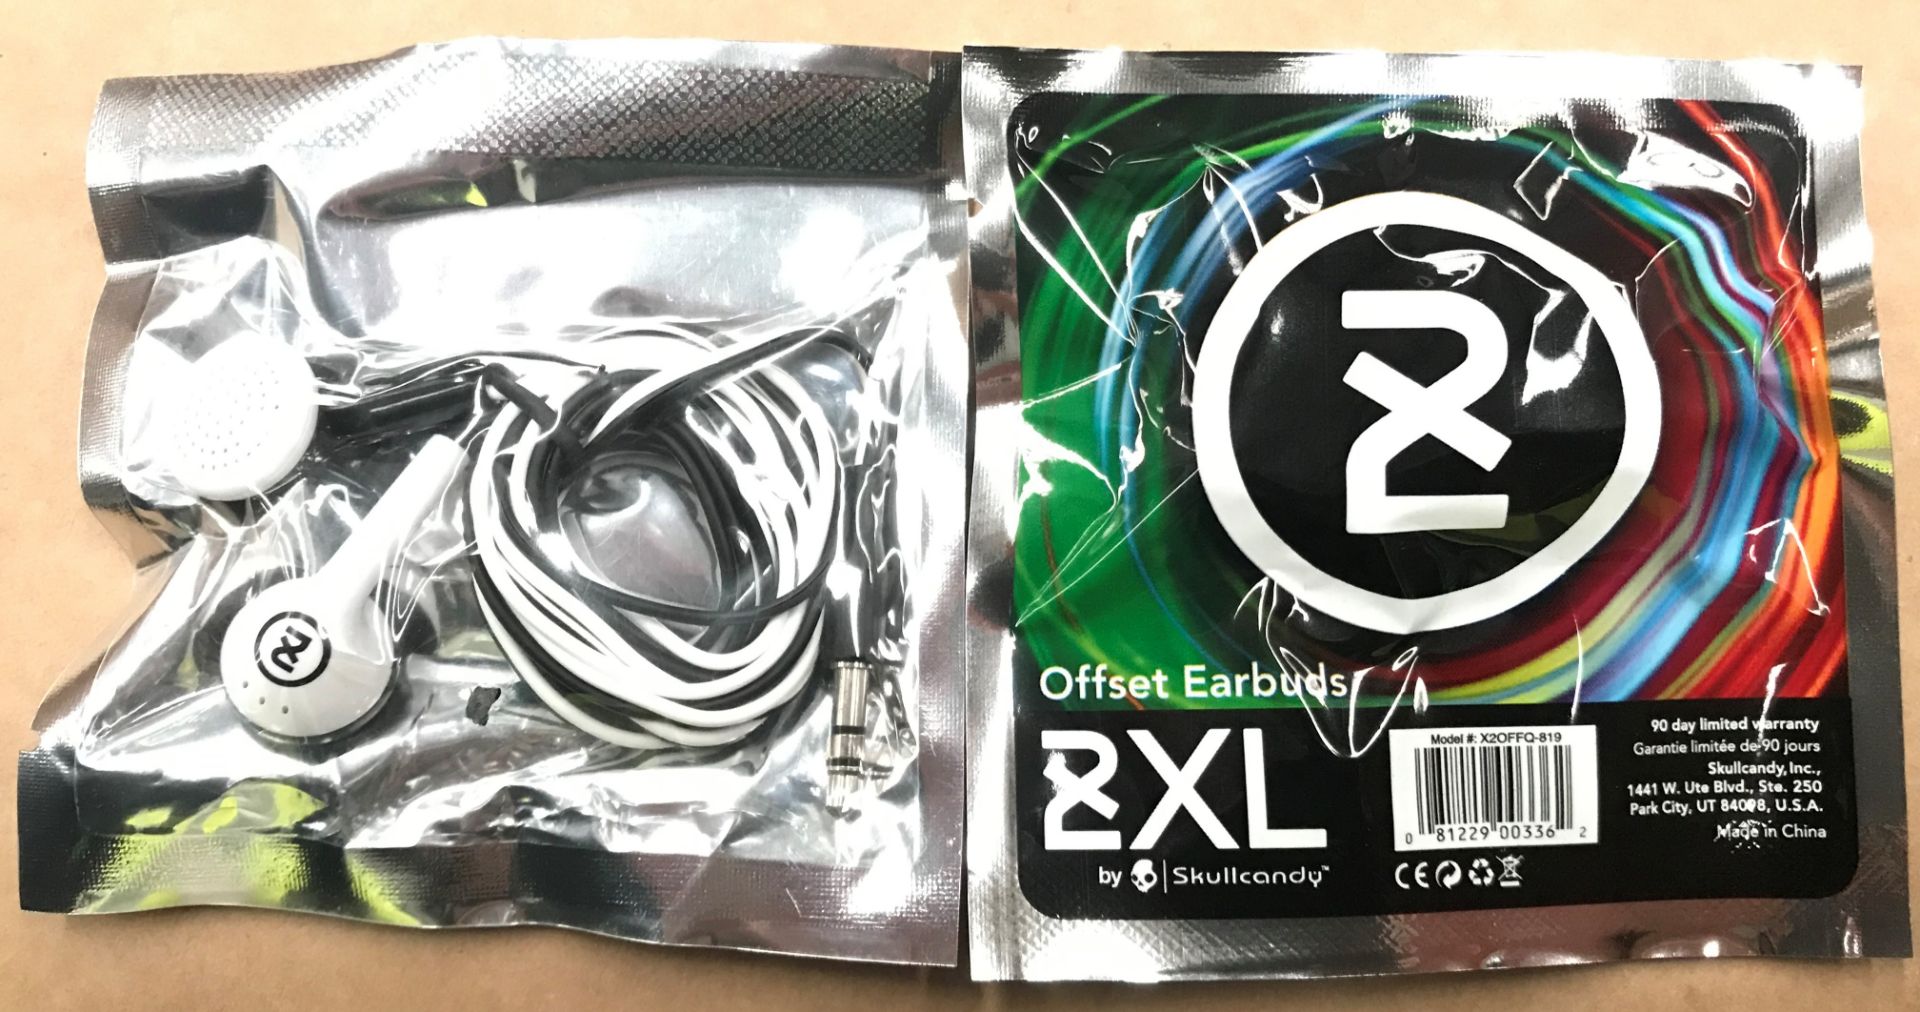 200 x 2XL Offset Earbuds/headphones by Skullcandy (8 inner bags) - black and white - Image 2 of 2